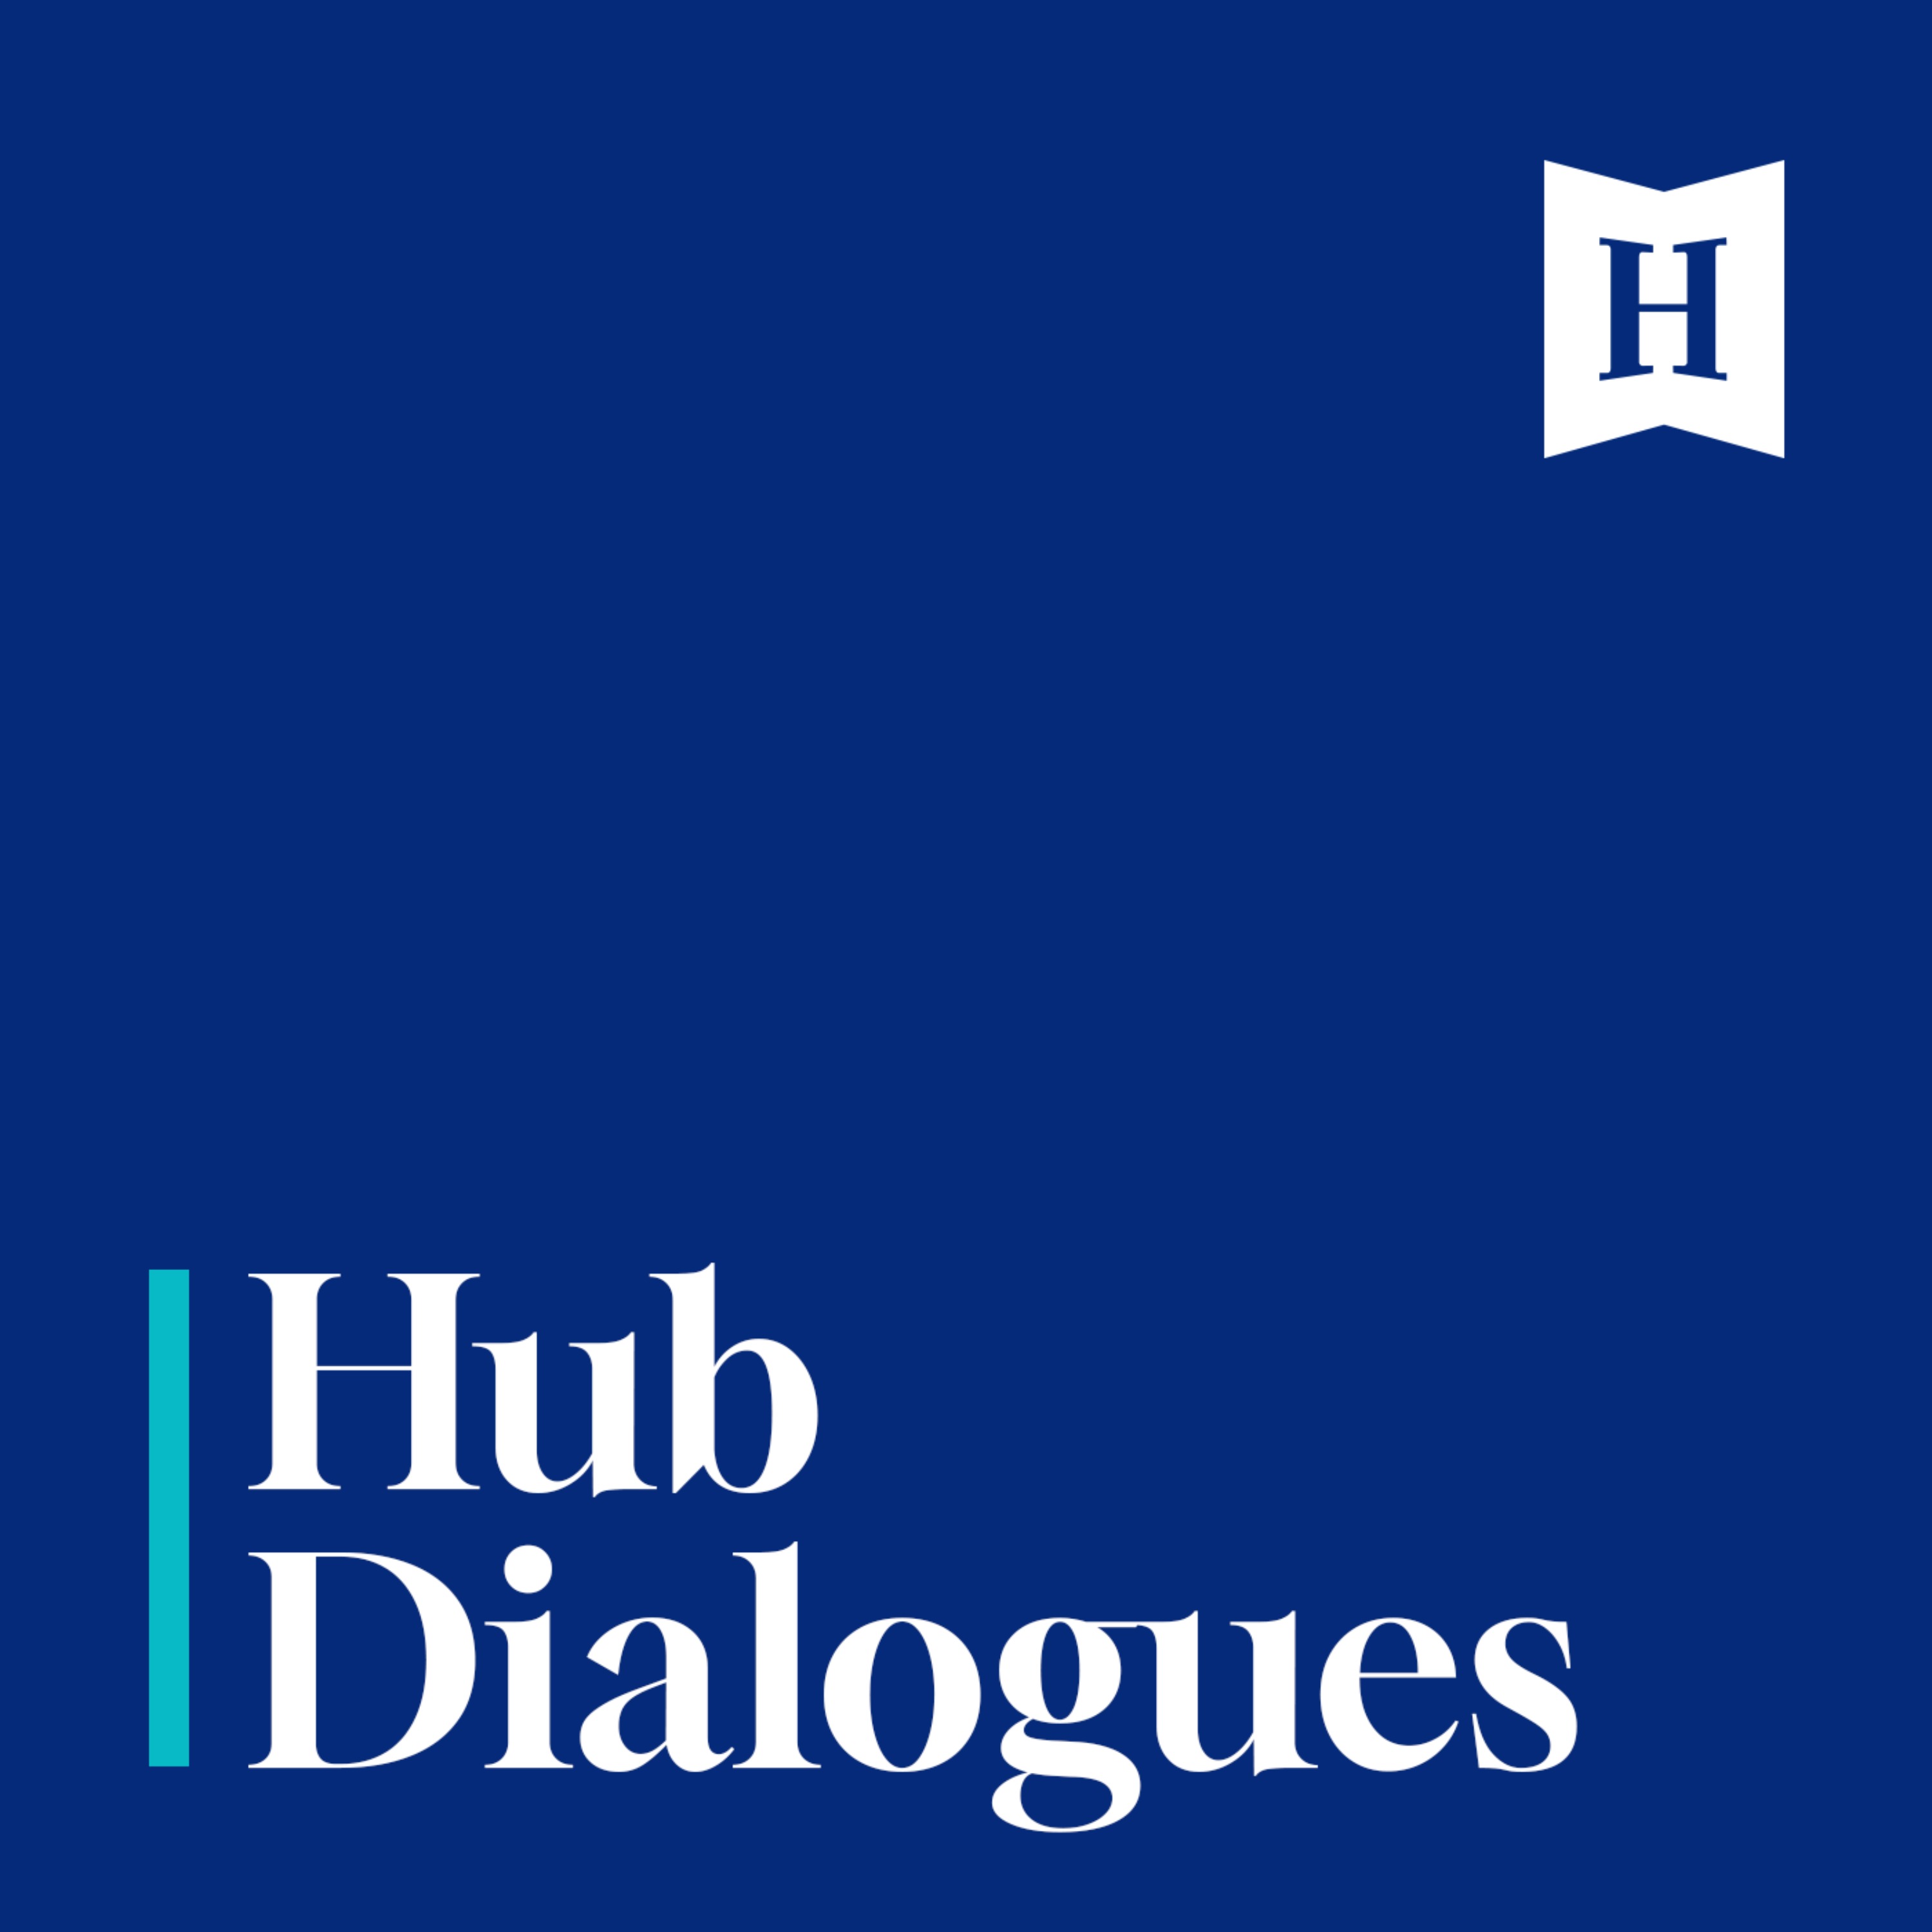 Hub Dialogues: Kelly Weinersmith on a city on Mars and the uncertain future of settling space